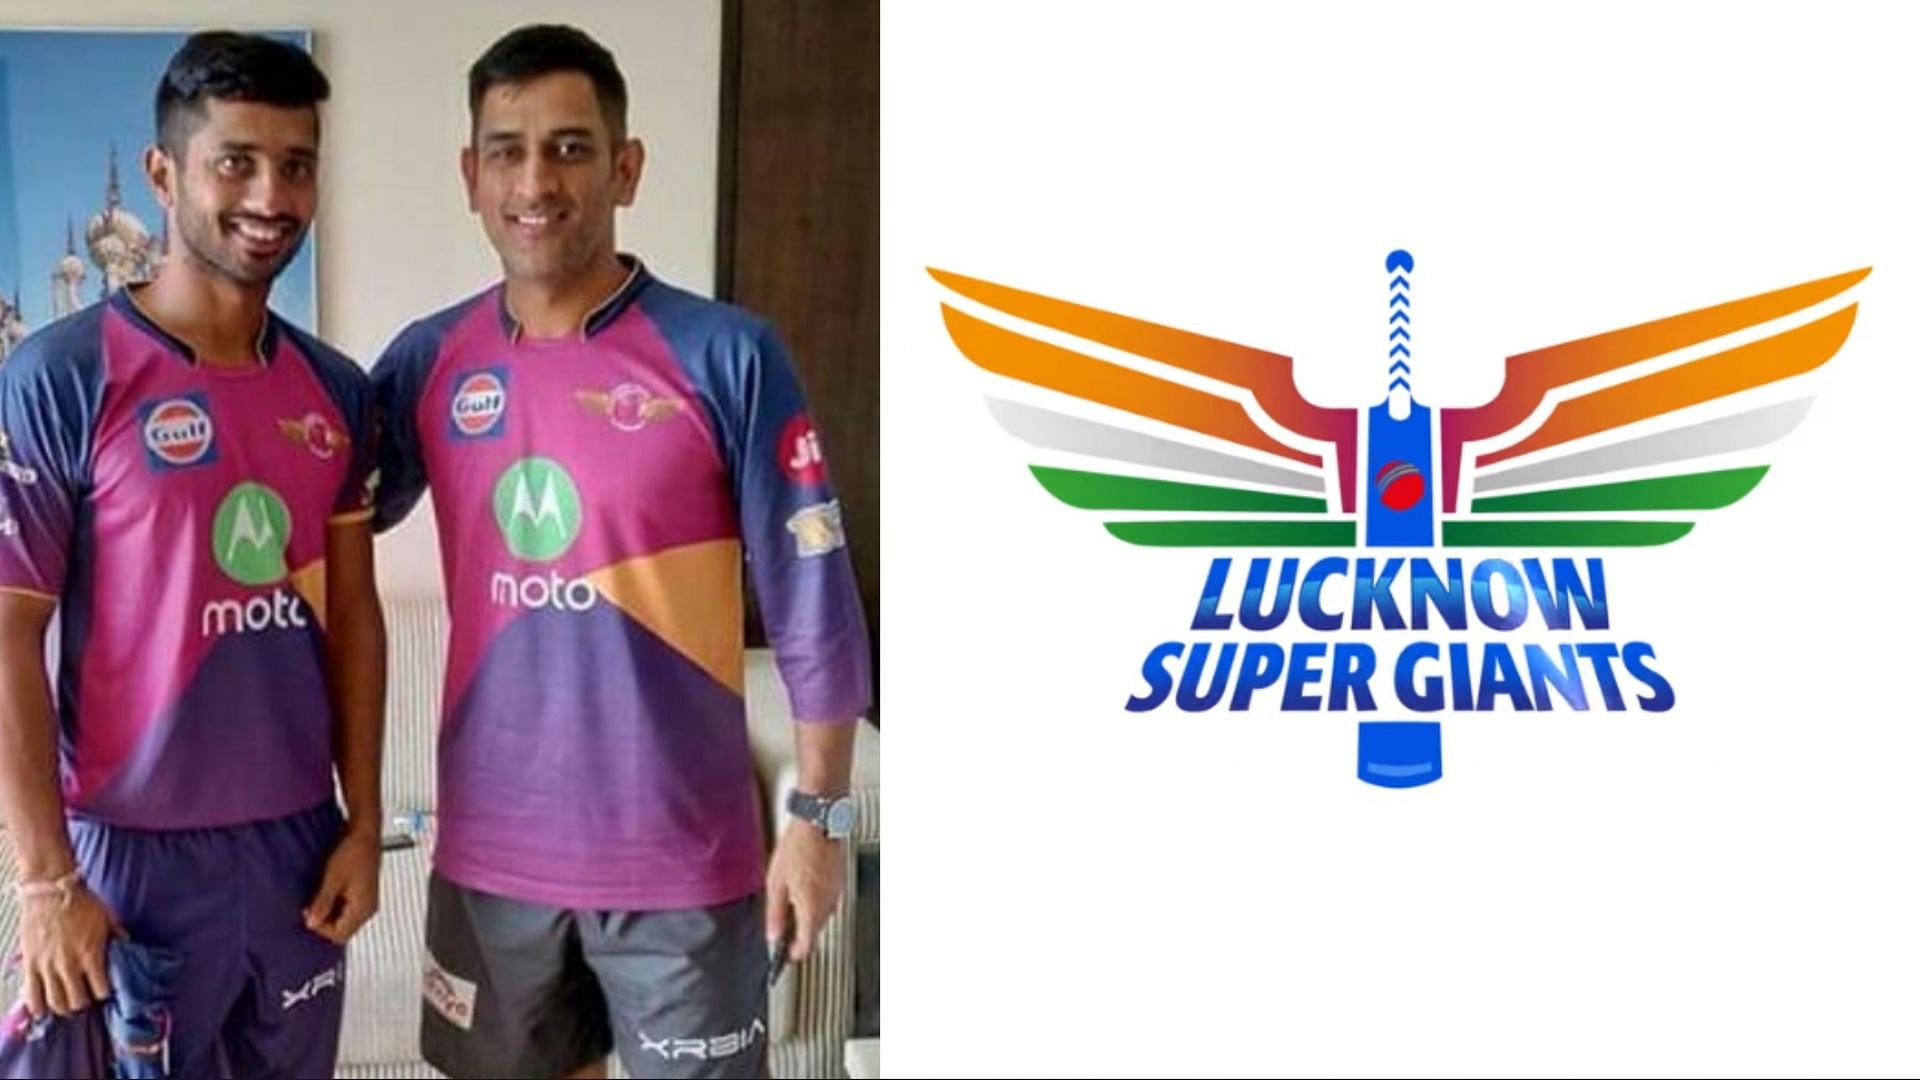 Rahul Tripathi can be an excellent addition to the Lucknow Super Giants squad (Image Source: Instagram)